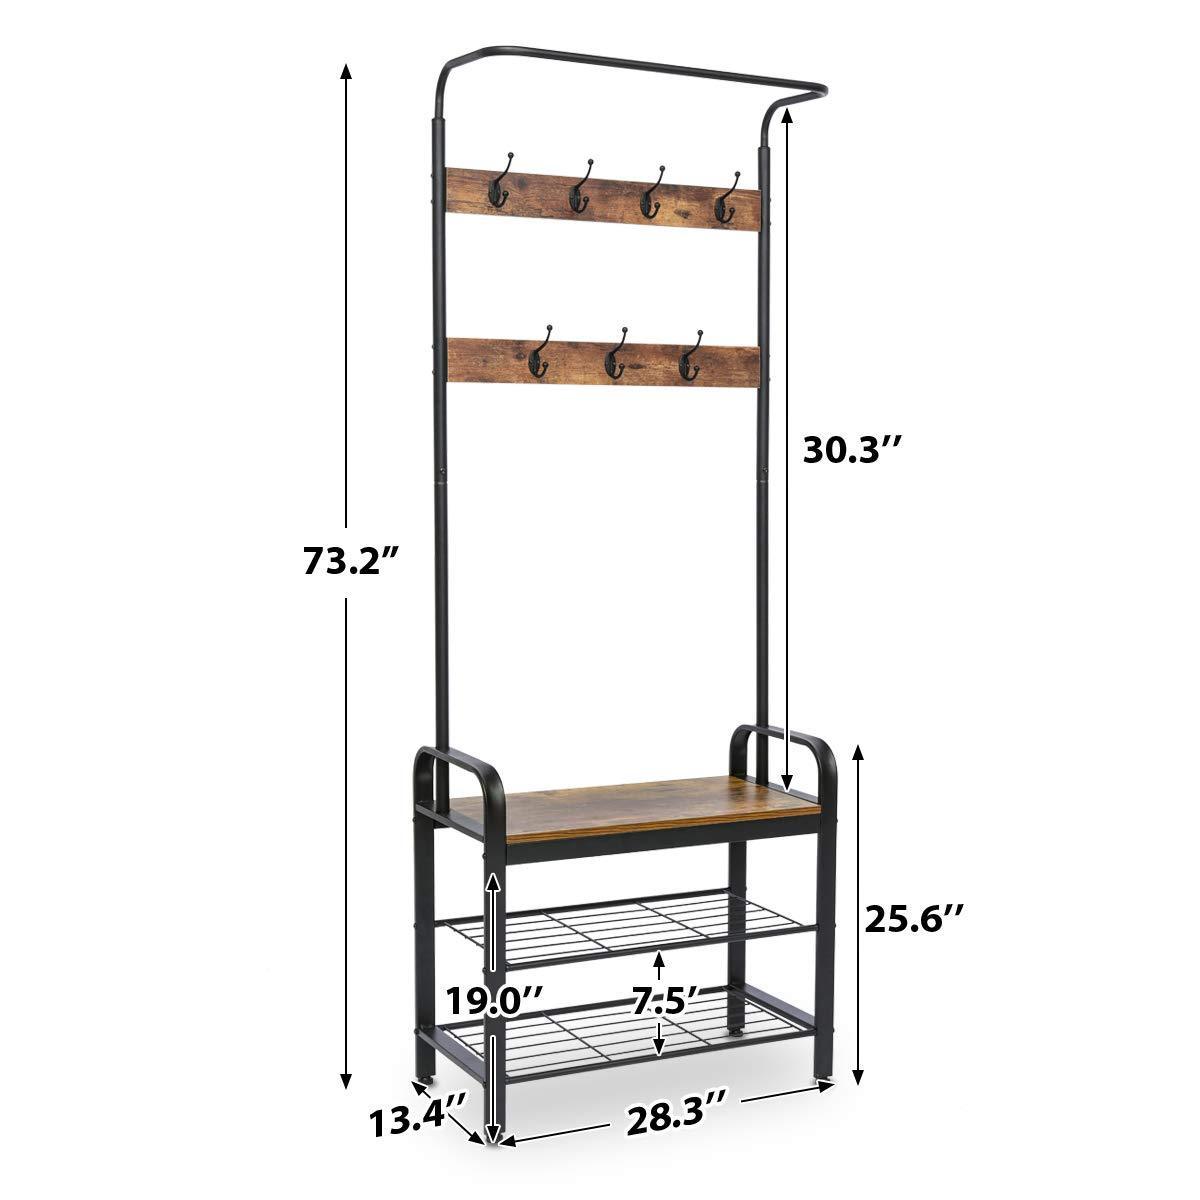 Try kingso industrial coat rack hall tree entryway coat shoe rack 3 tier shoe bench 7 hooks wood look accent furniture with stable metal frame easy assembly